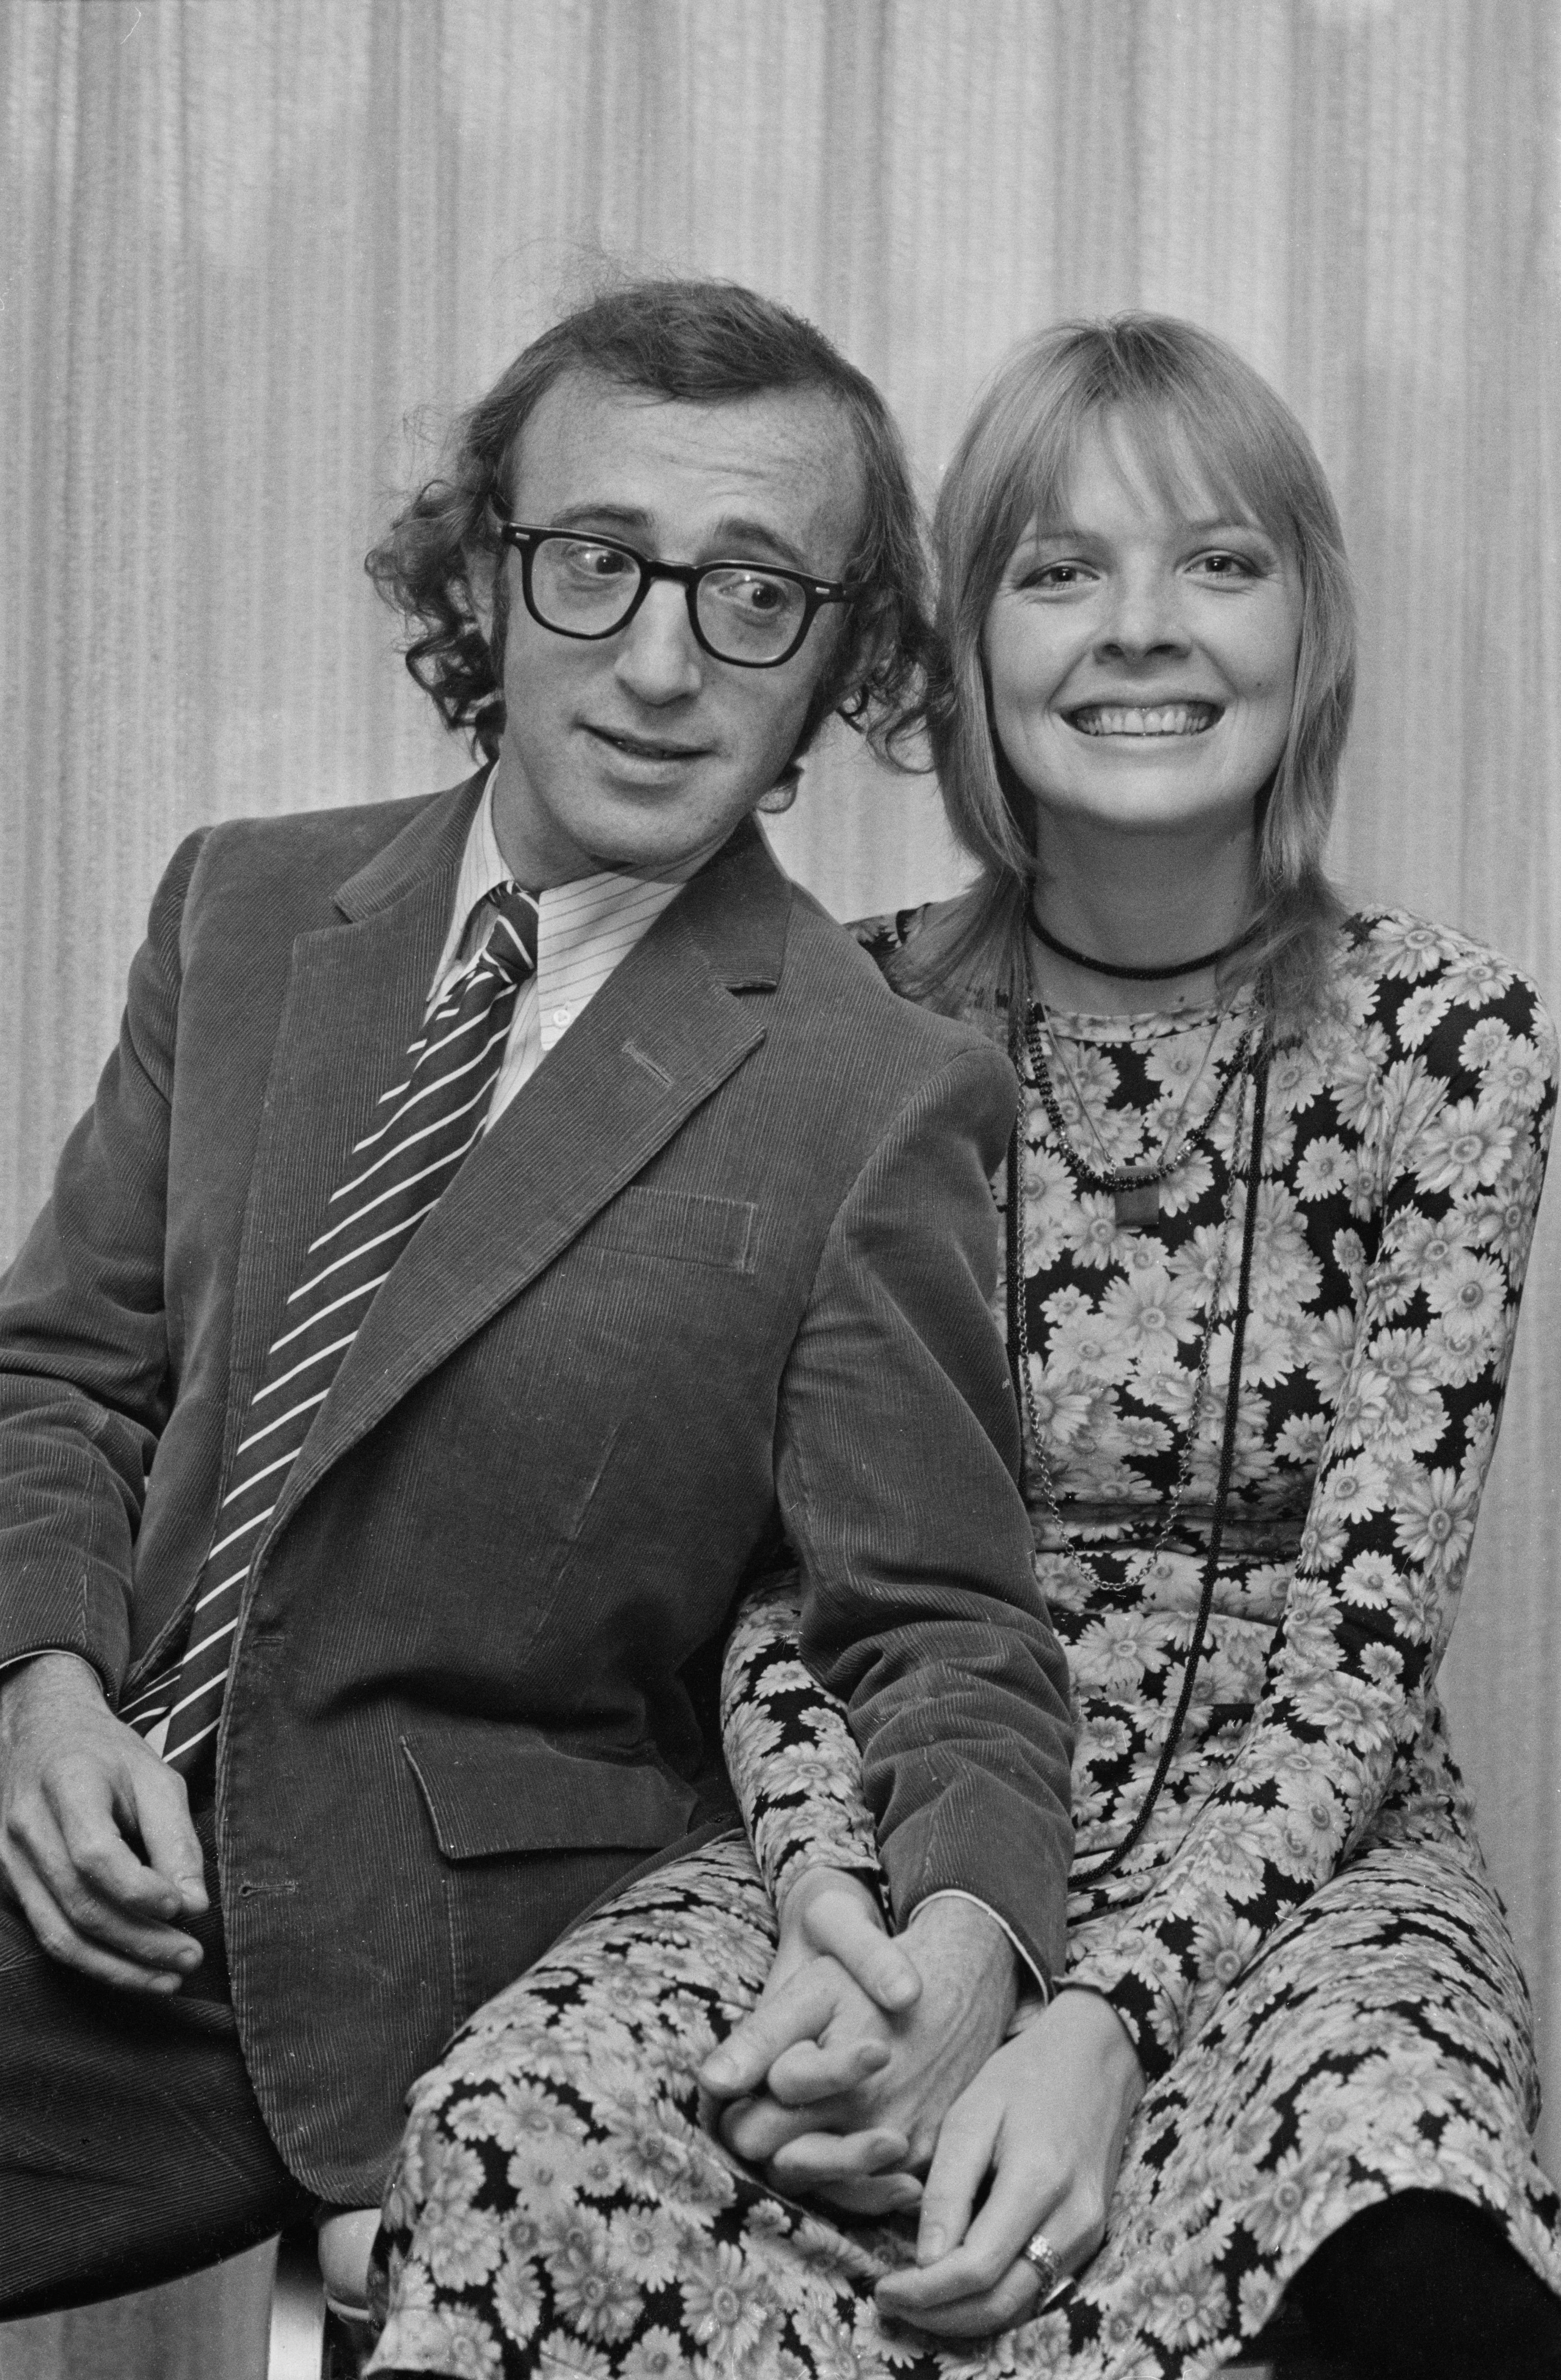 Woody Allen and Diane Keaton at the Hilton Hotel, London in 1970 | Source: Getty Images